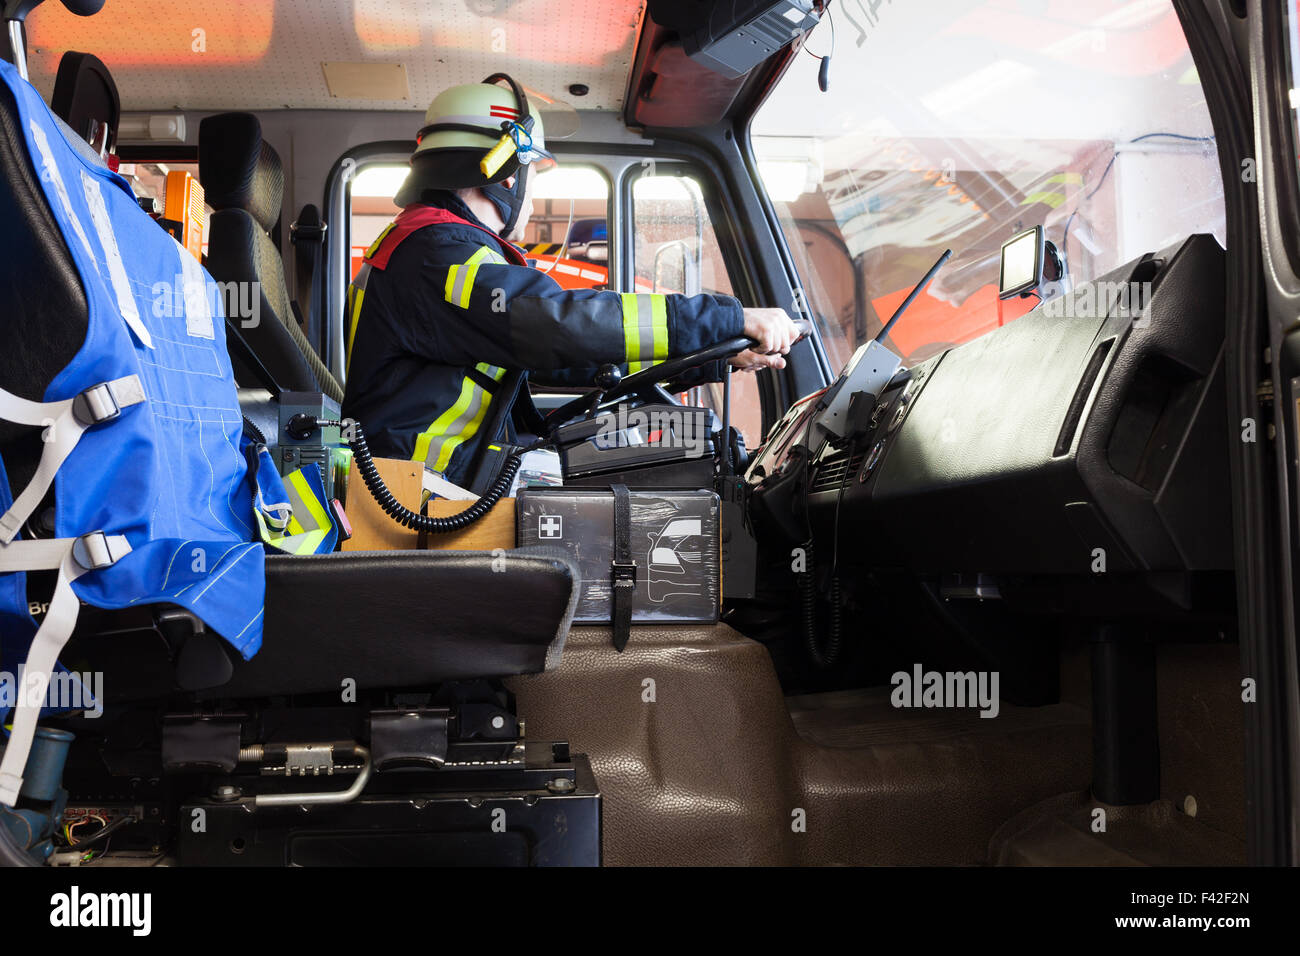 Firefighter driving a used fire truck Stock Photo